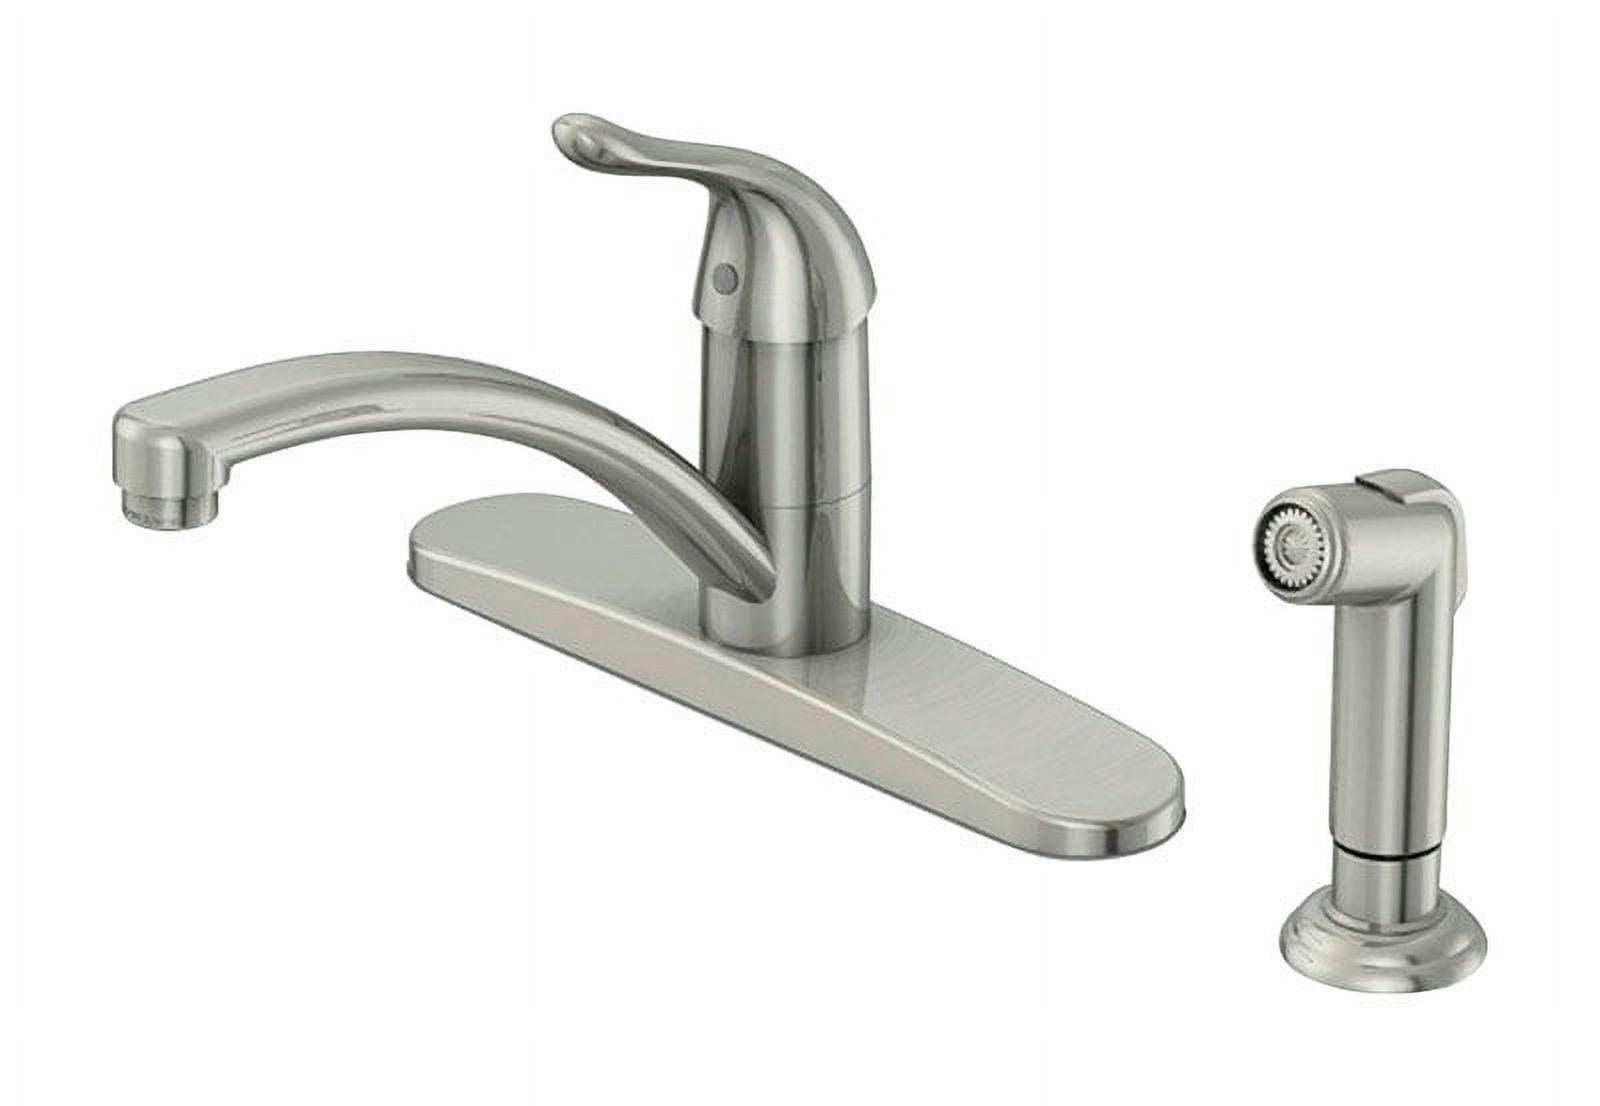 OakBrook Pacifica Brushed Nickel Single-Handle Kitchen Faucet with Side Sprayer